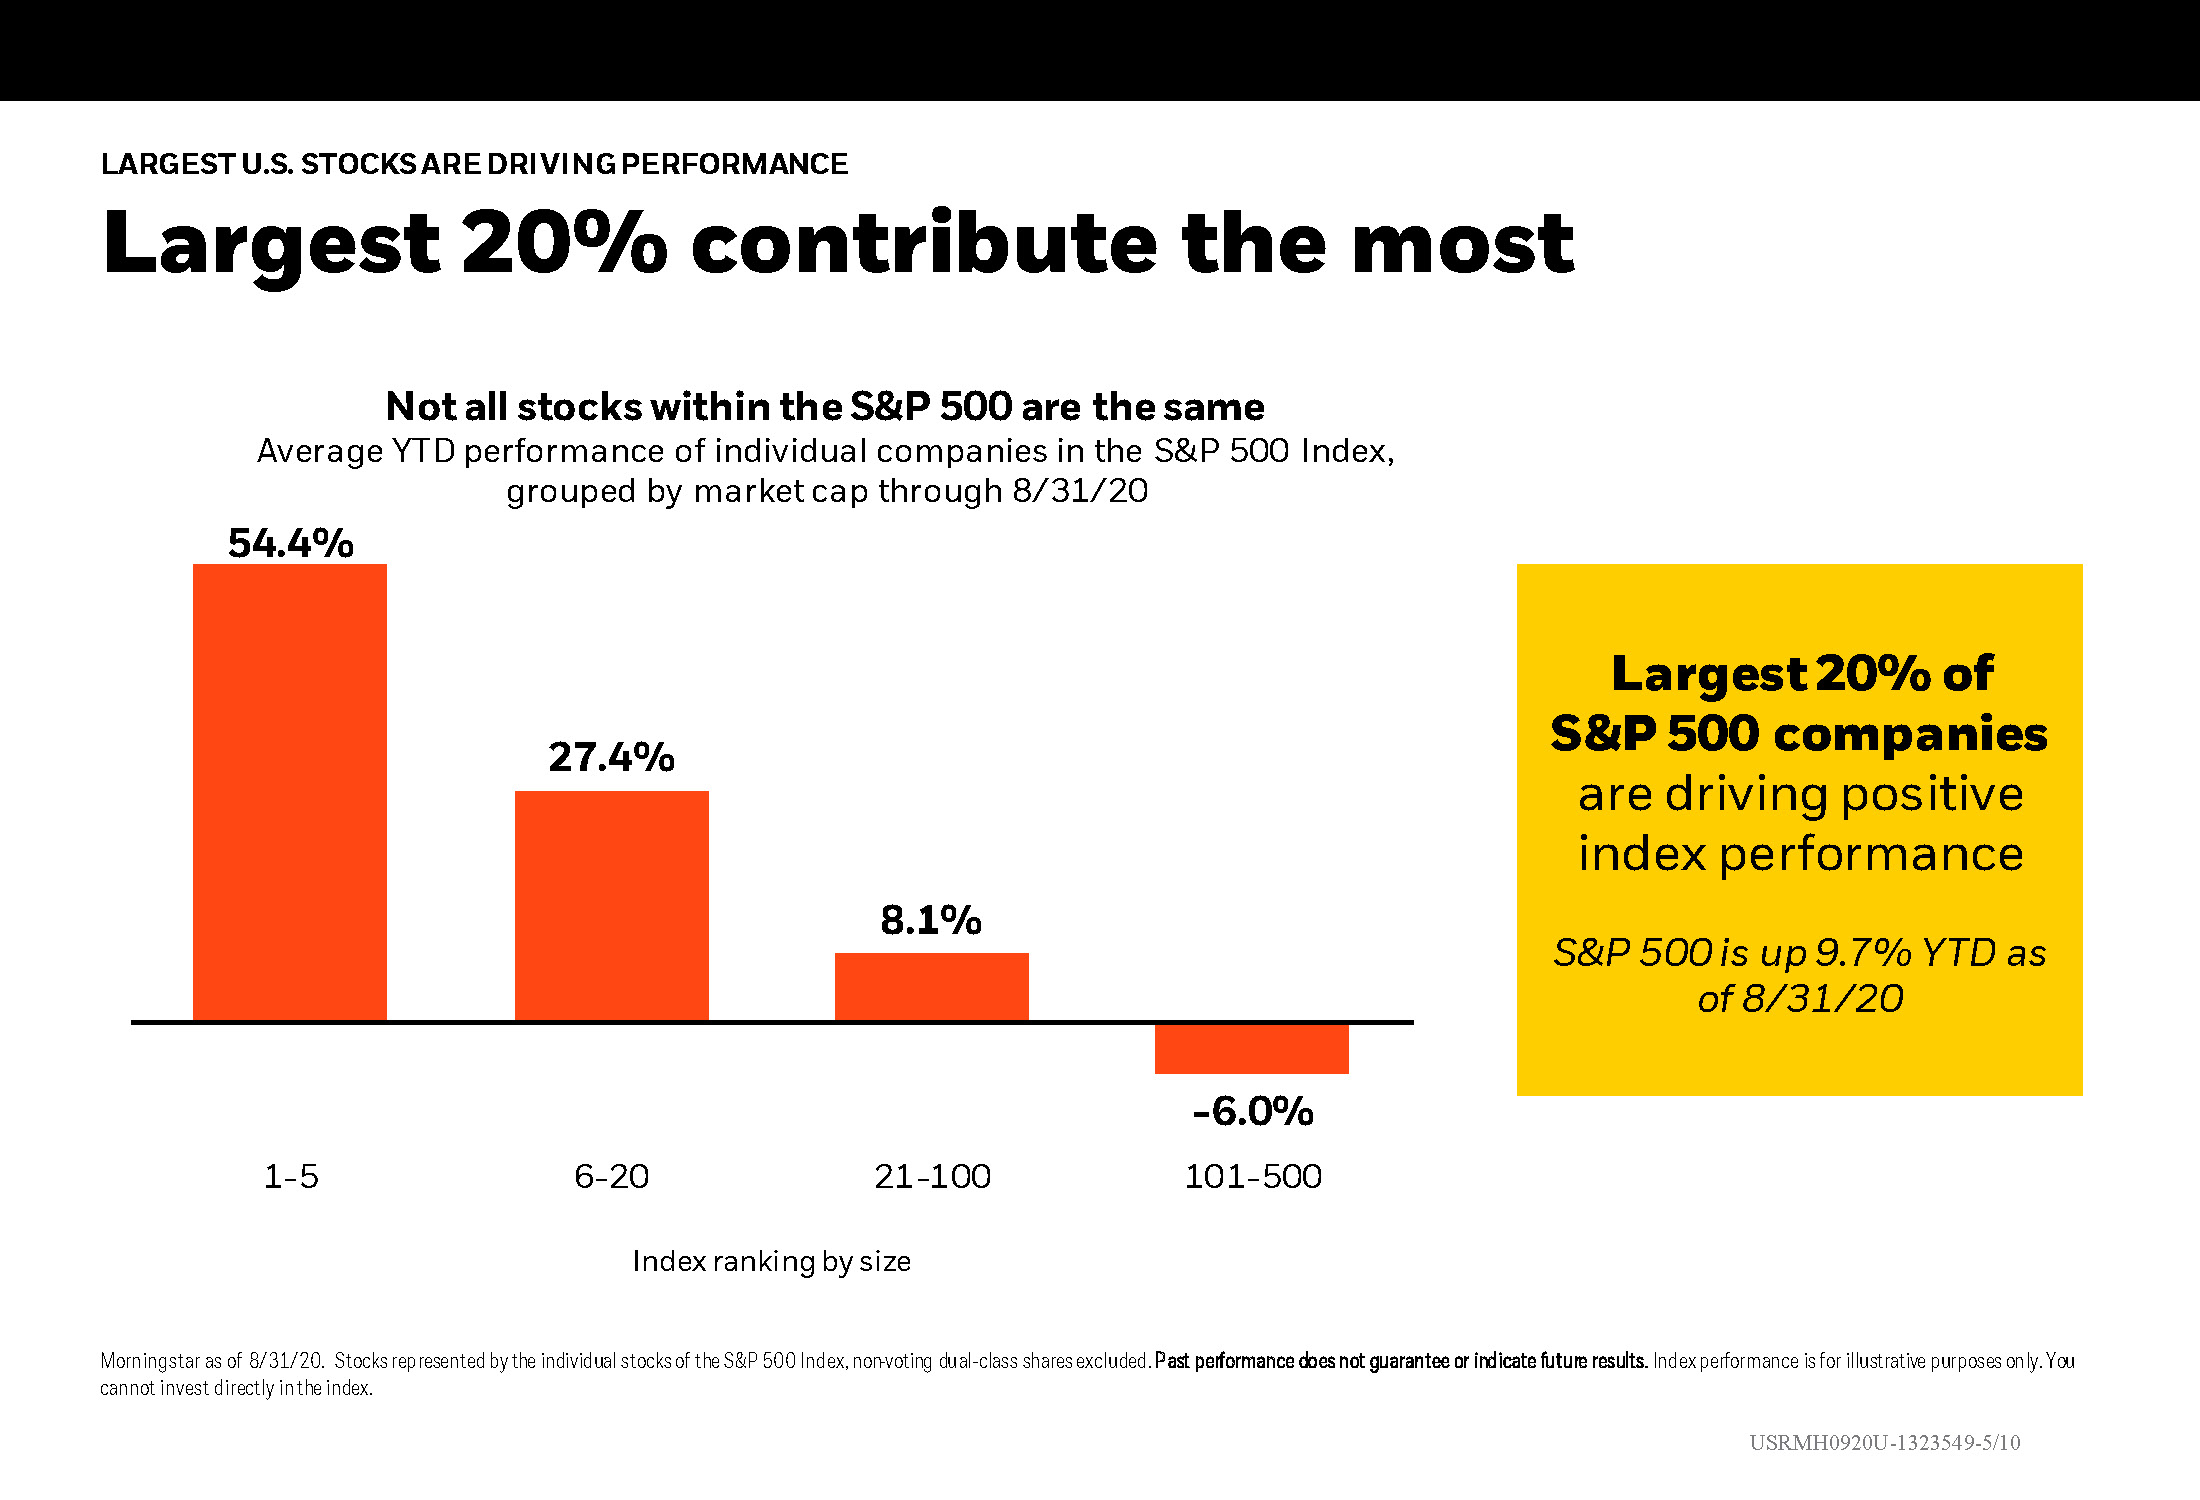 Largest 20% contribute the most